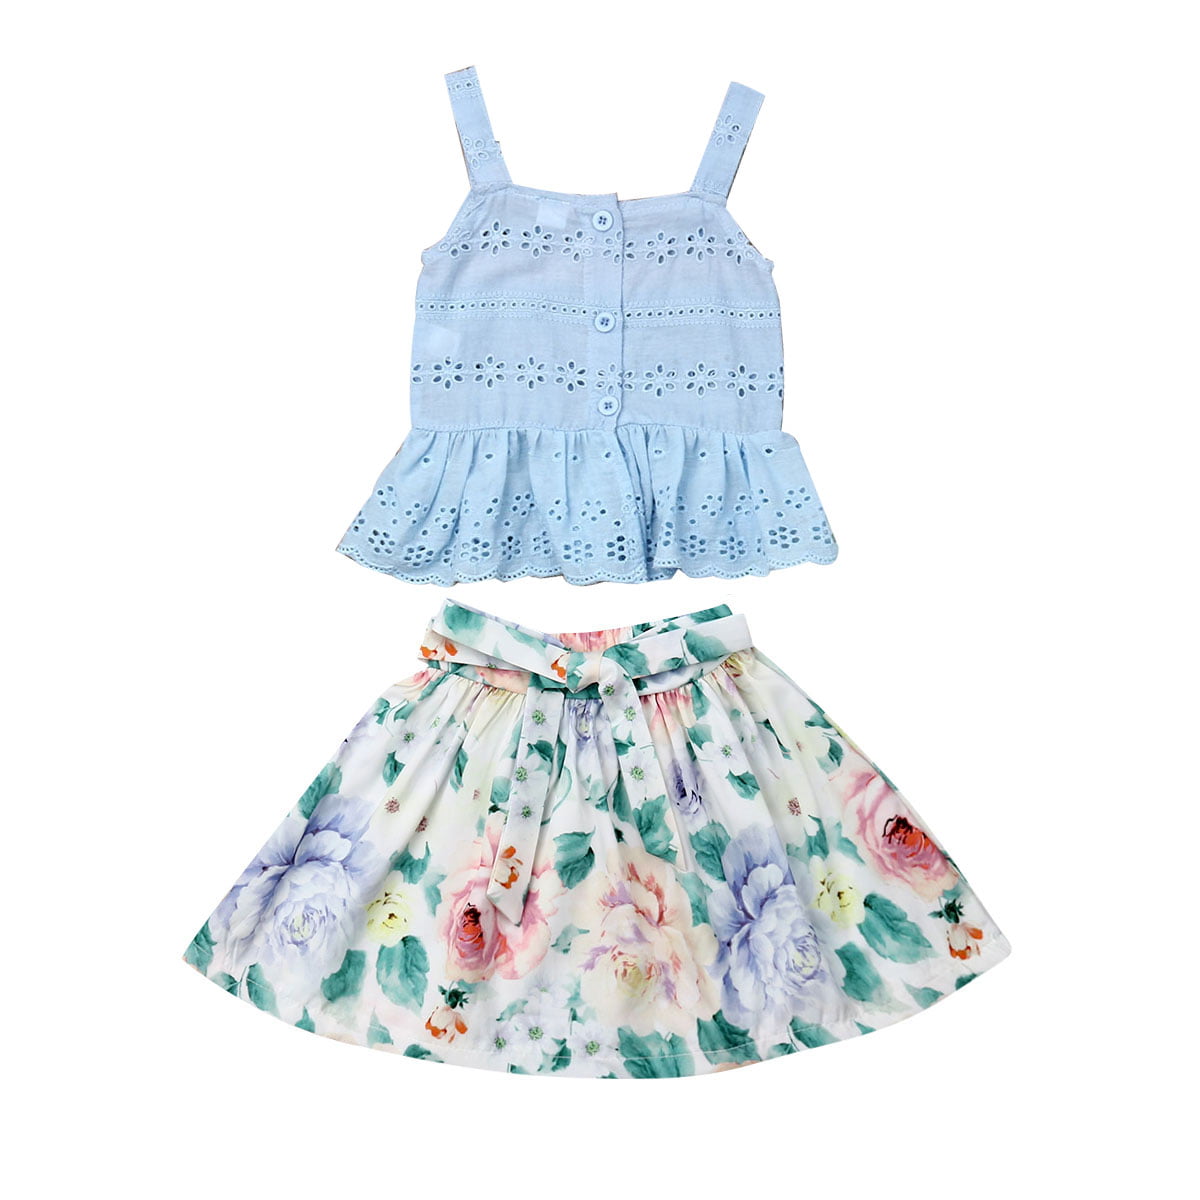 for 0-5 Years Old Baby Outfit,Lovely Newborn Baby Girls Off Shoulder Floral Print T Shirt Tops and Flower Shorts Skirt 2Pcs Outfits Set Summer Clothes Set